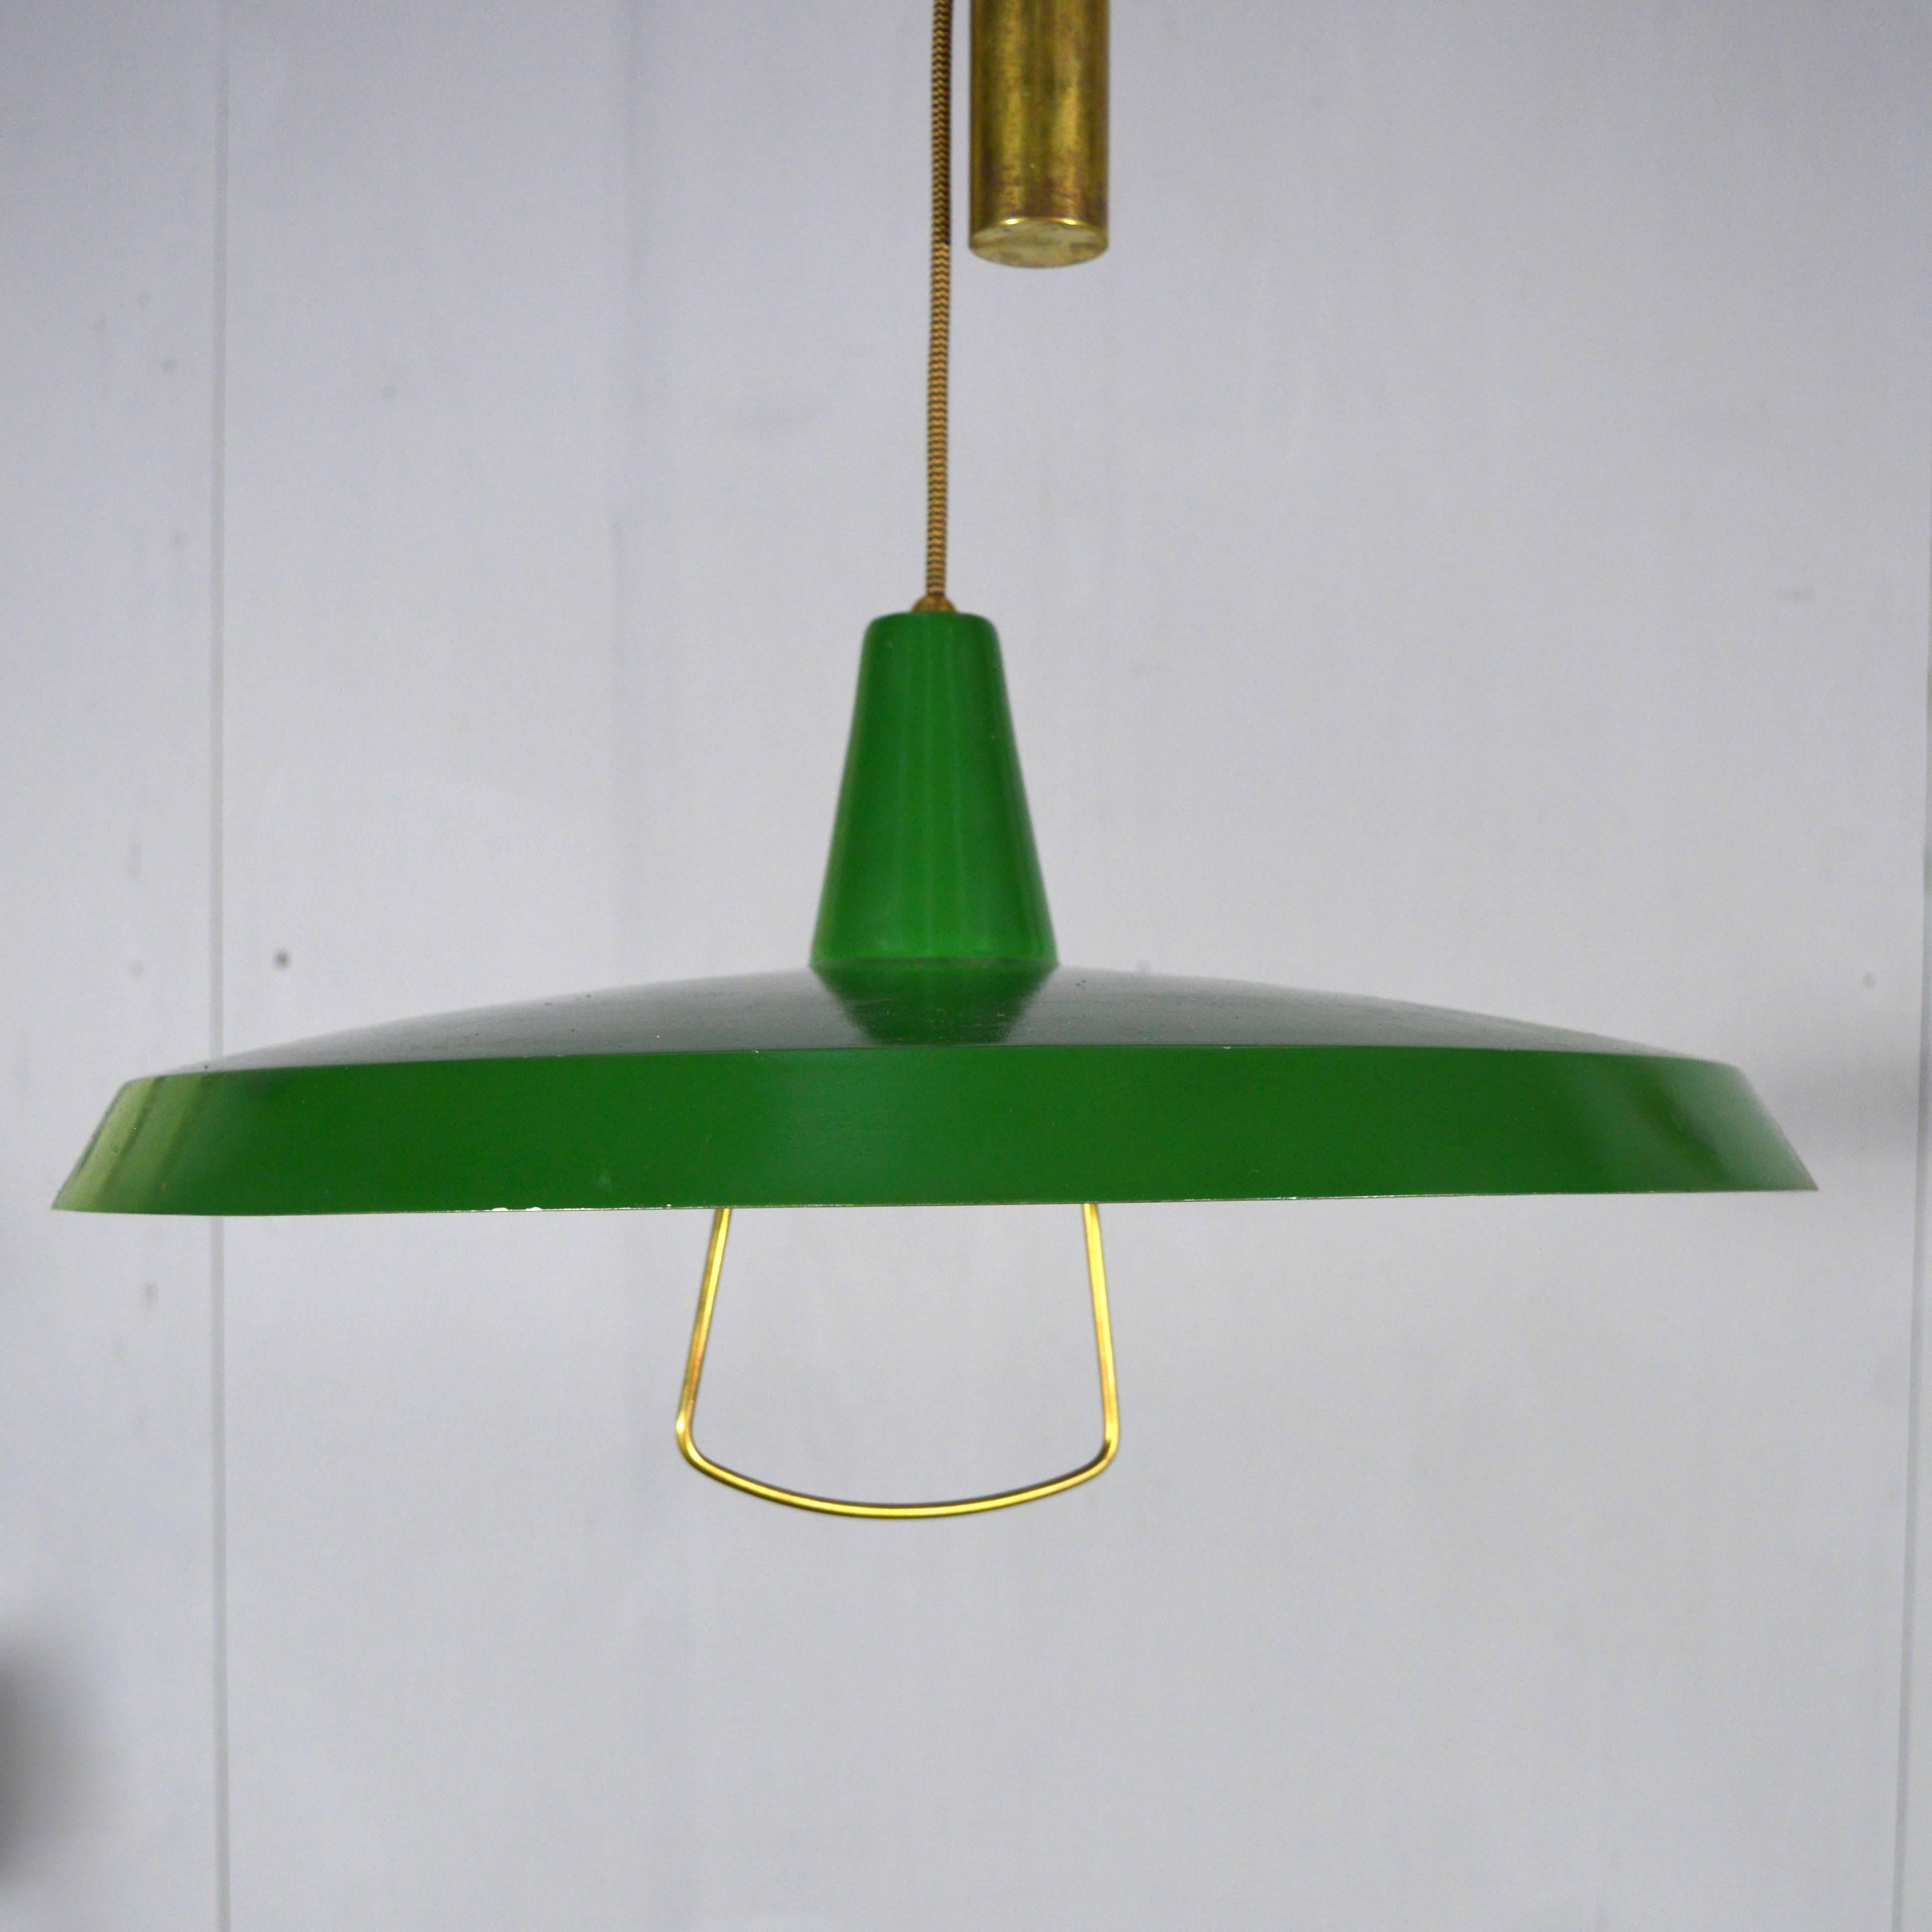 Gorgeous counter balance pendant lamp with brass counterweight and other brass details.
Green enabled metal lampshade.
The lamp has new wiring. Just attach an US or other socket plug and it is ready to go.
E26 bulb socket.

